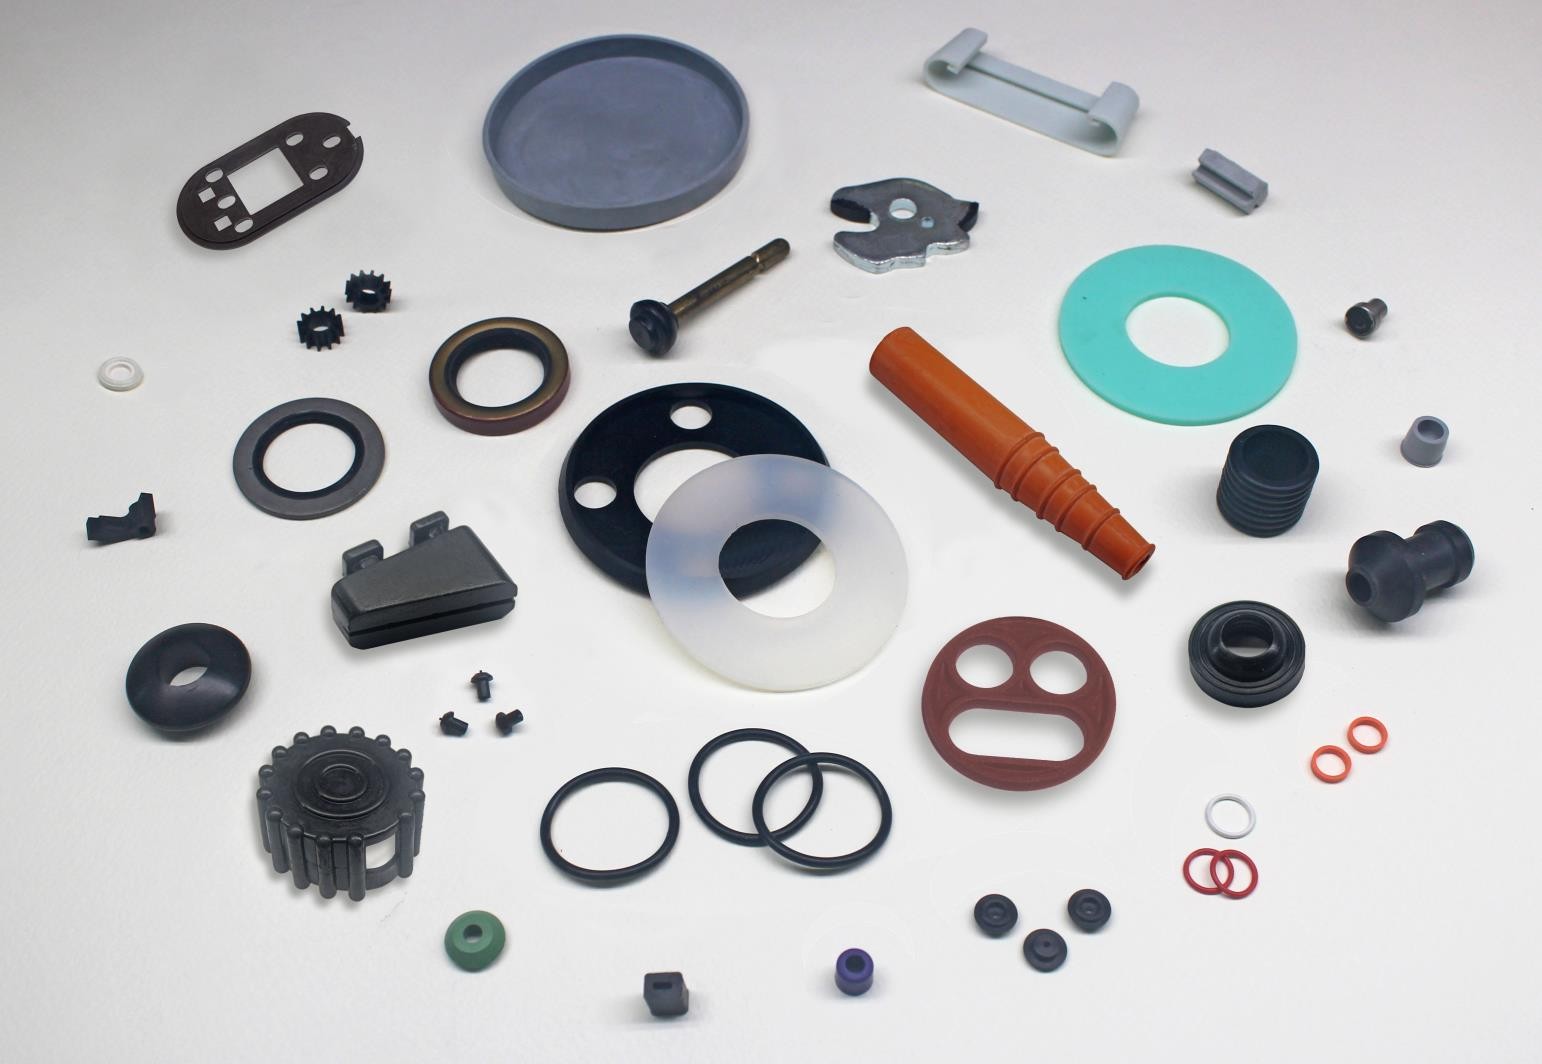 Rubber special specification parts